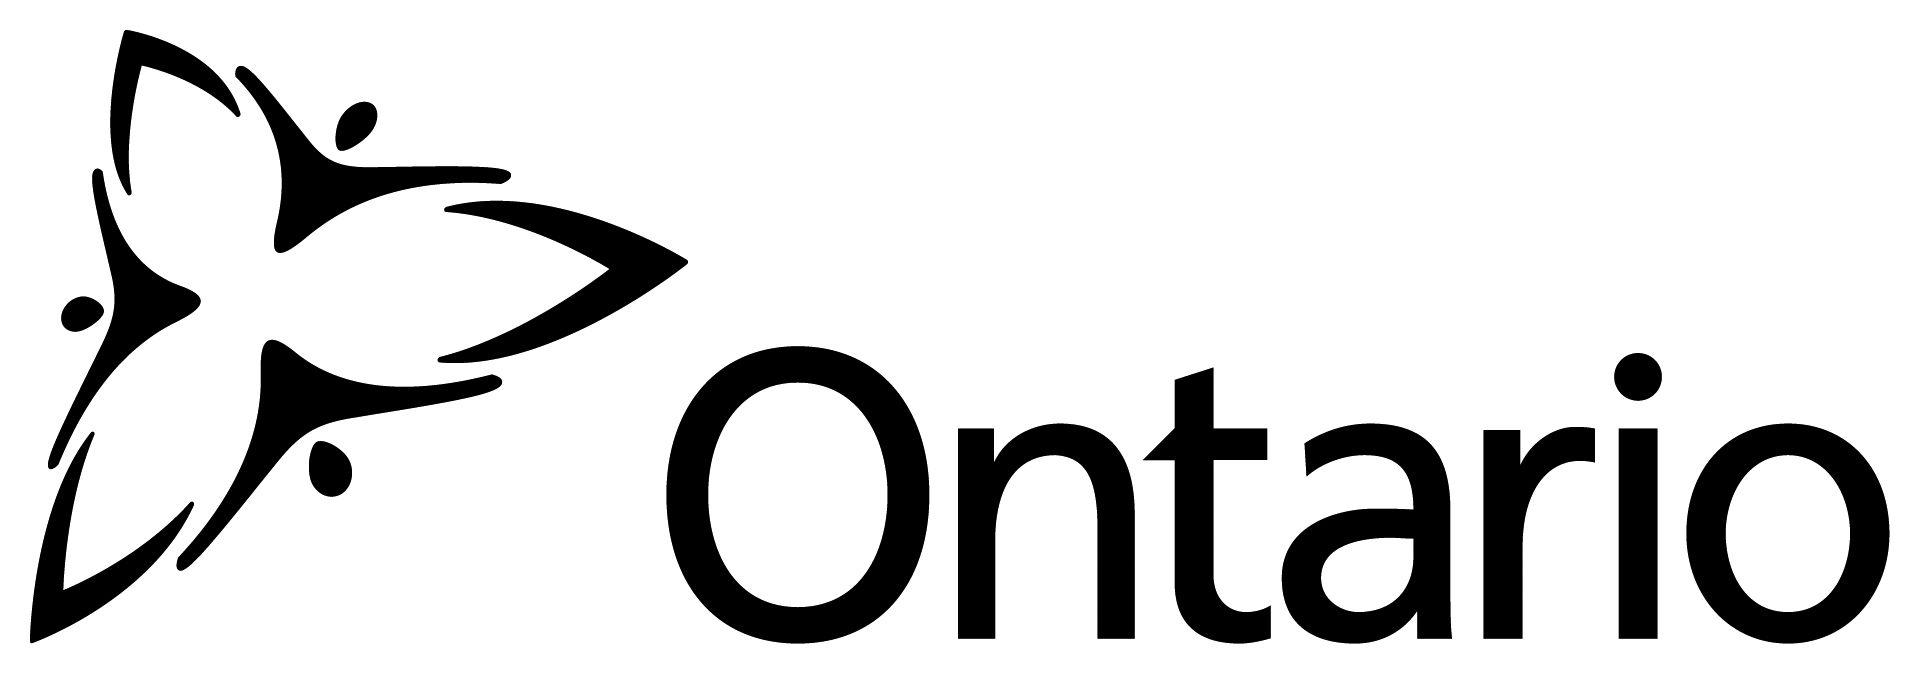 3 People Logo - Ontario's trillium logo looks like 3 people hangin' out in a hottub